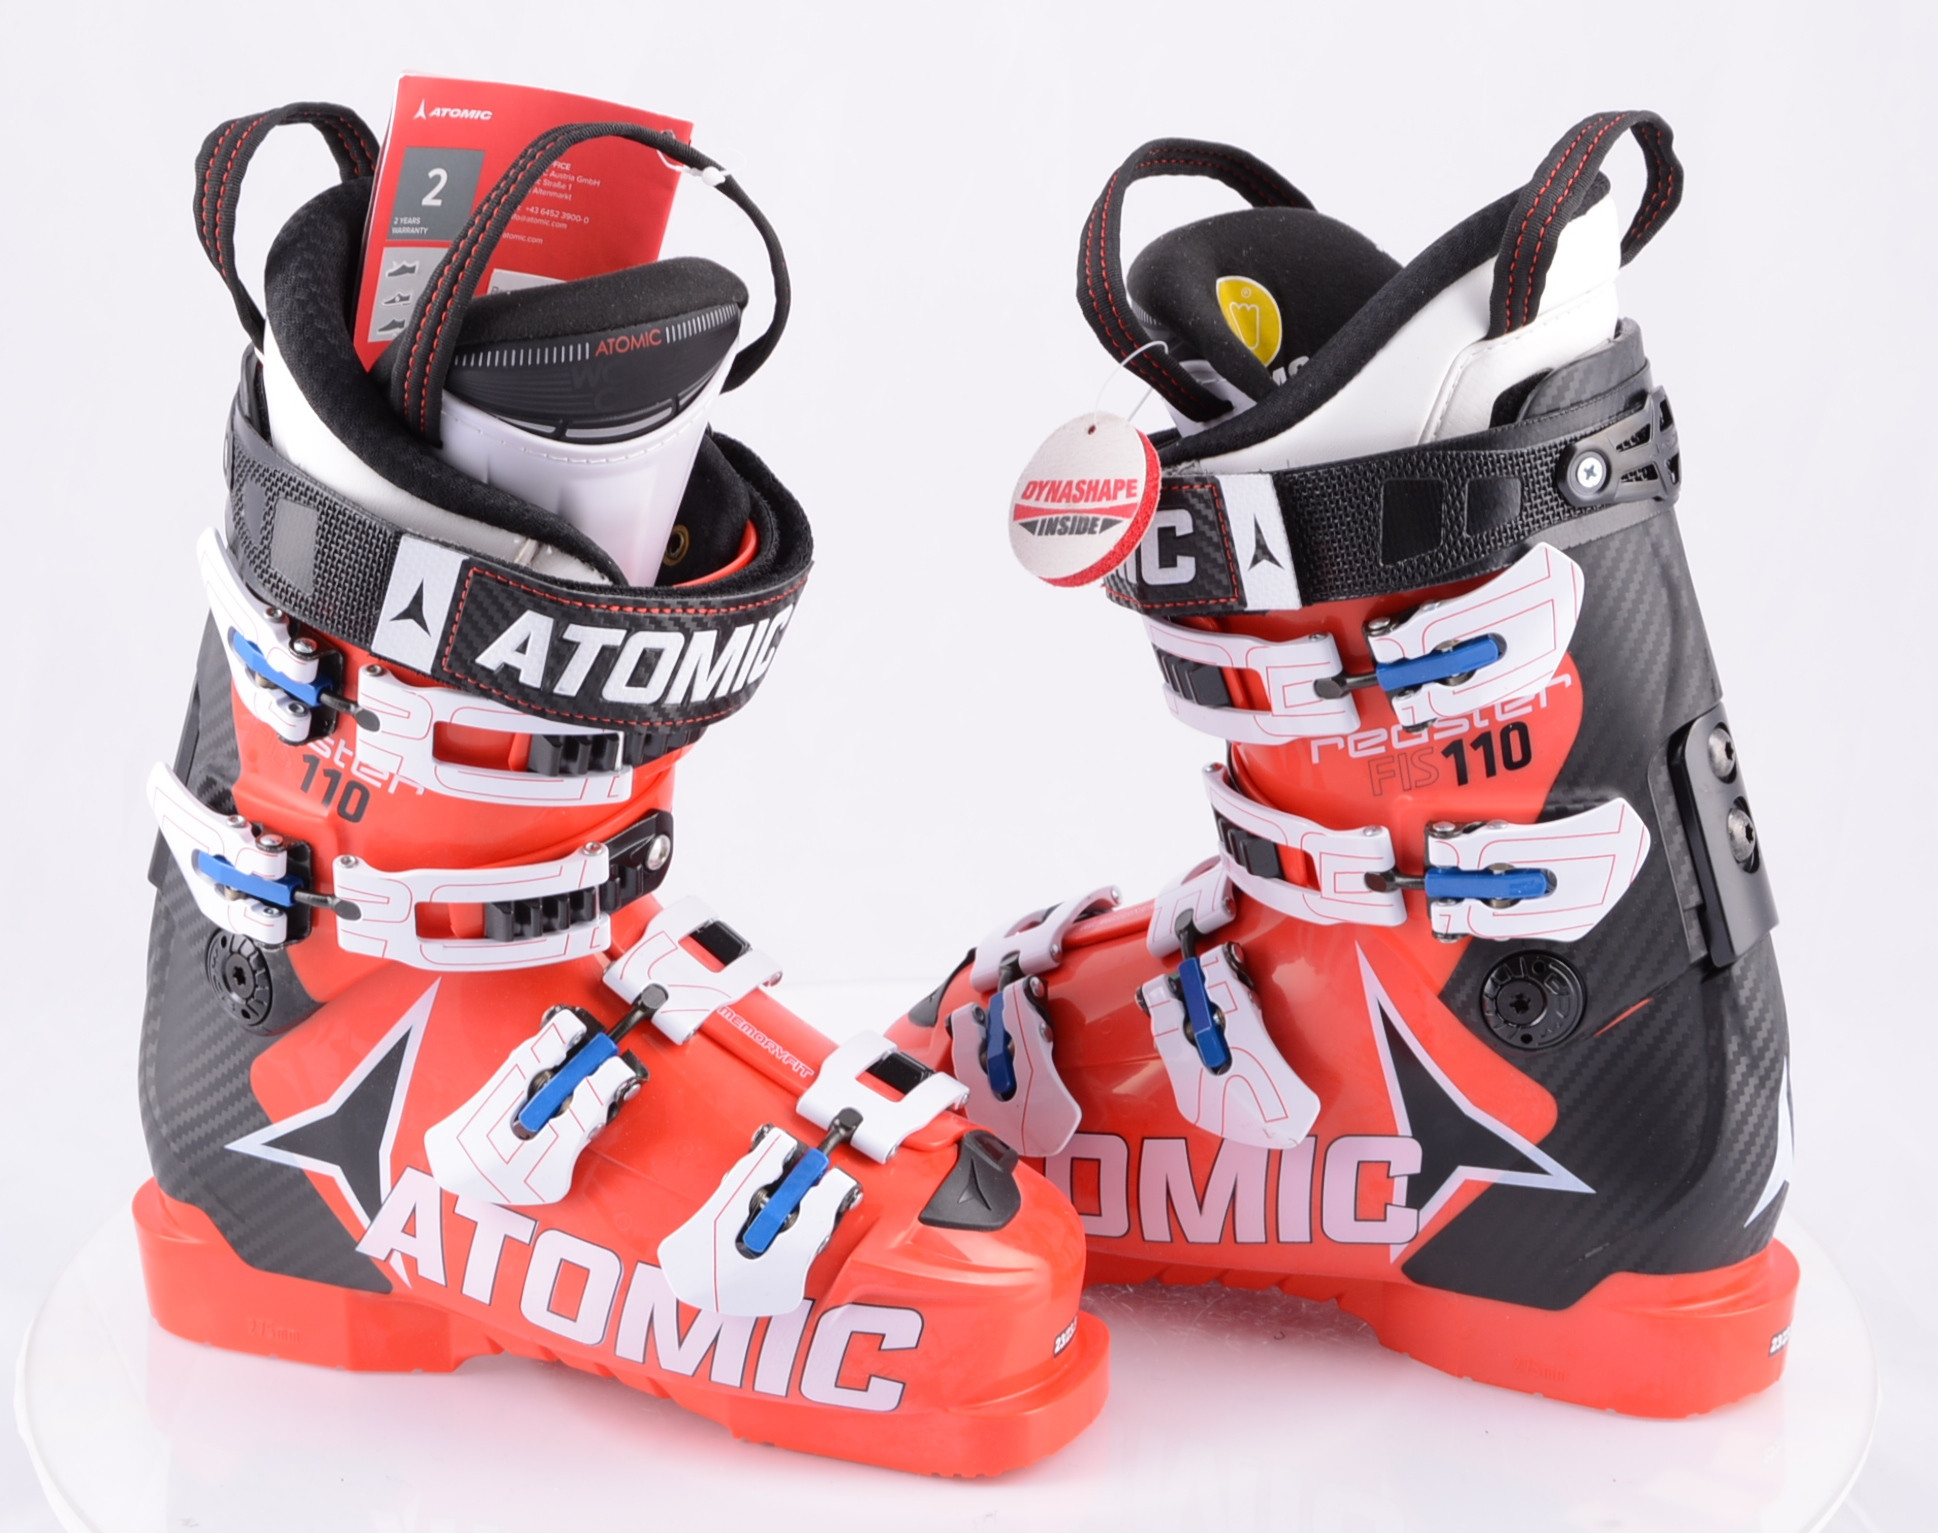 new ski boots ATOMIC REDSTER FIS 110, RED/black, MEMORY FIT